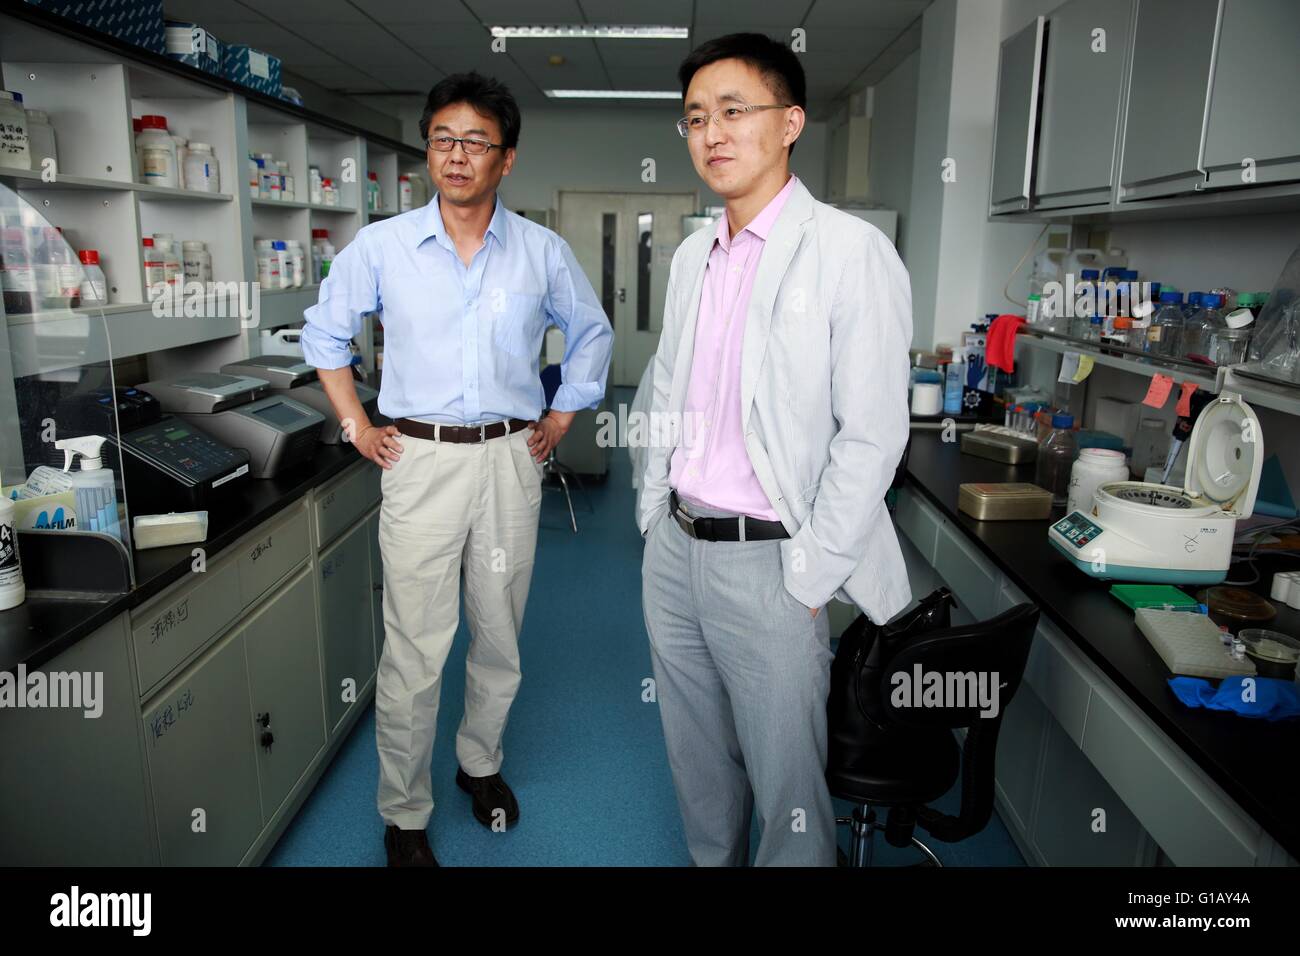 Beijing, China. 11th May, 2016. Xu Zhiheng (L) with the Institute of Genetics and Developmental Biology of the Chinese Academy of Sciences and Qin Chengfeng with the Beijing Institute of Microbiology and Epidemiology introduce their collaborative research to the press in Beijing, capital of China, May 11, 2016. Chinese researchers said Wednesday they have found direct evidence that Zika infection causes microcephaly, a birth defect marked by an abnormally small head, in mouse experiments. © Cai Yang/Xinhua/Alamy Live News Stock Photo